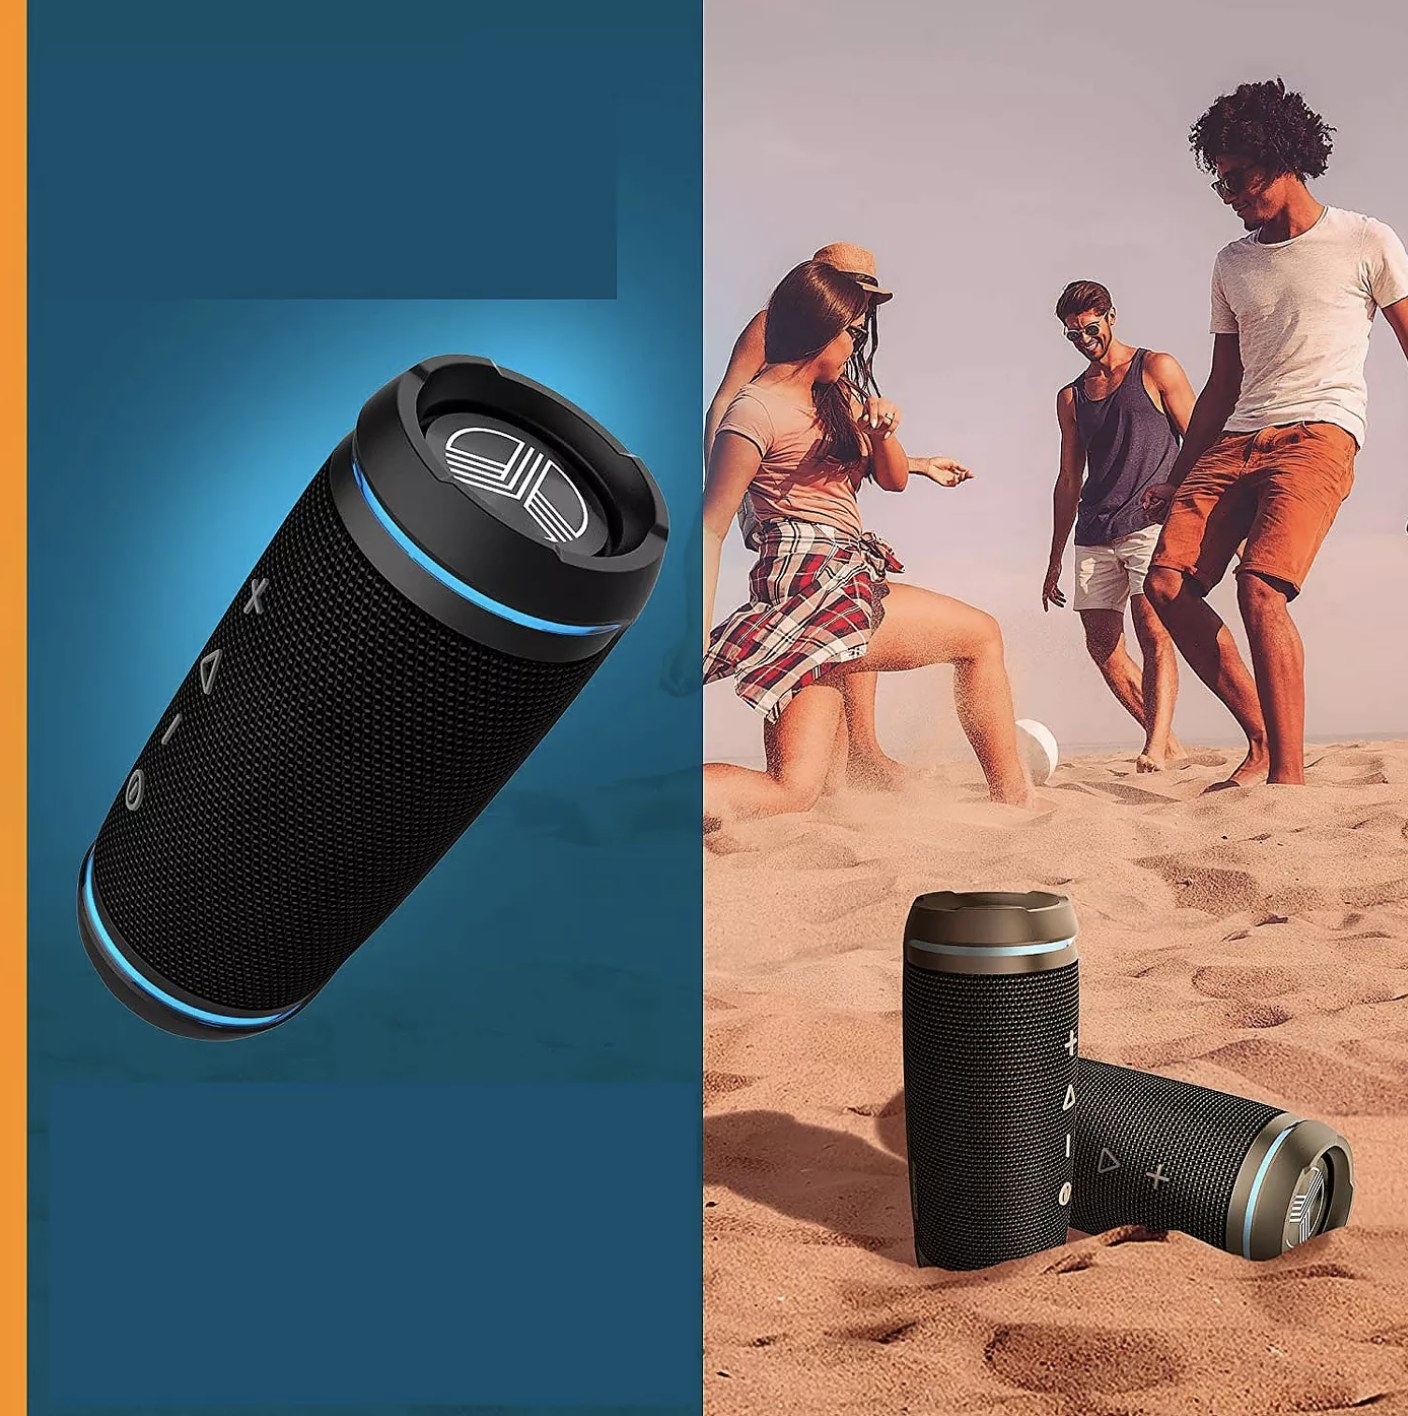 A blue tooth speaker in sand near people playing soccer